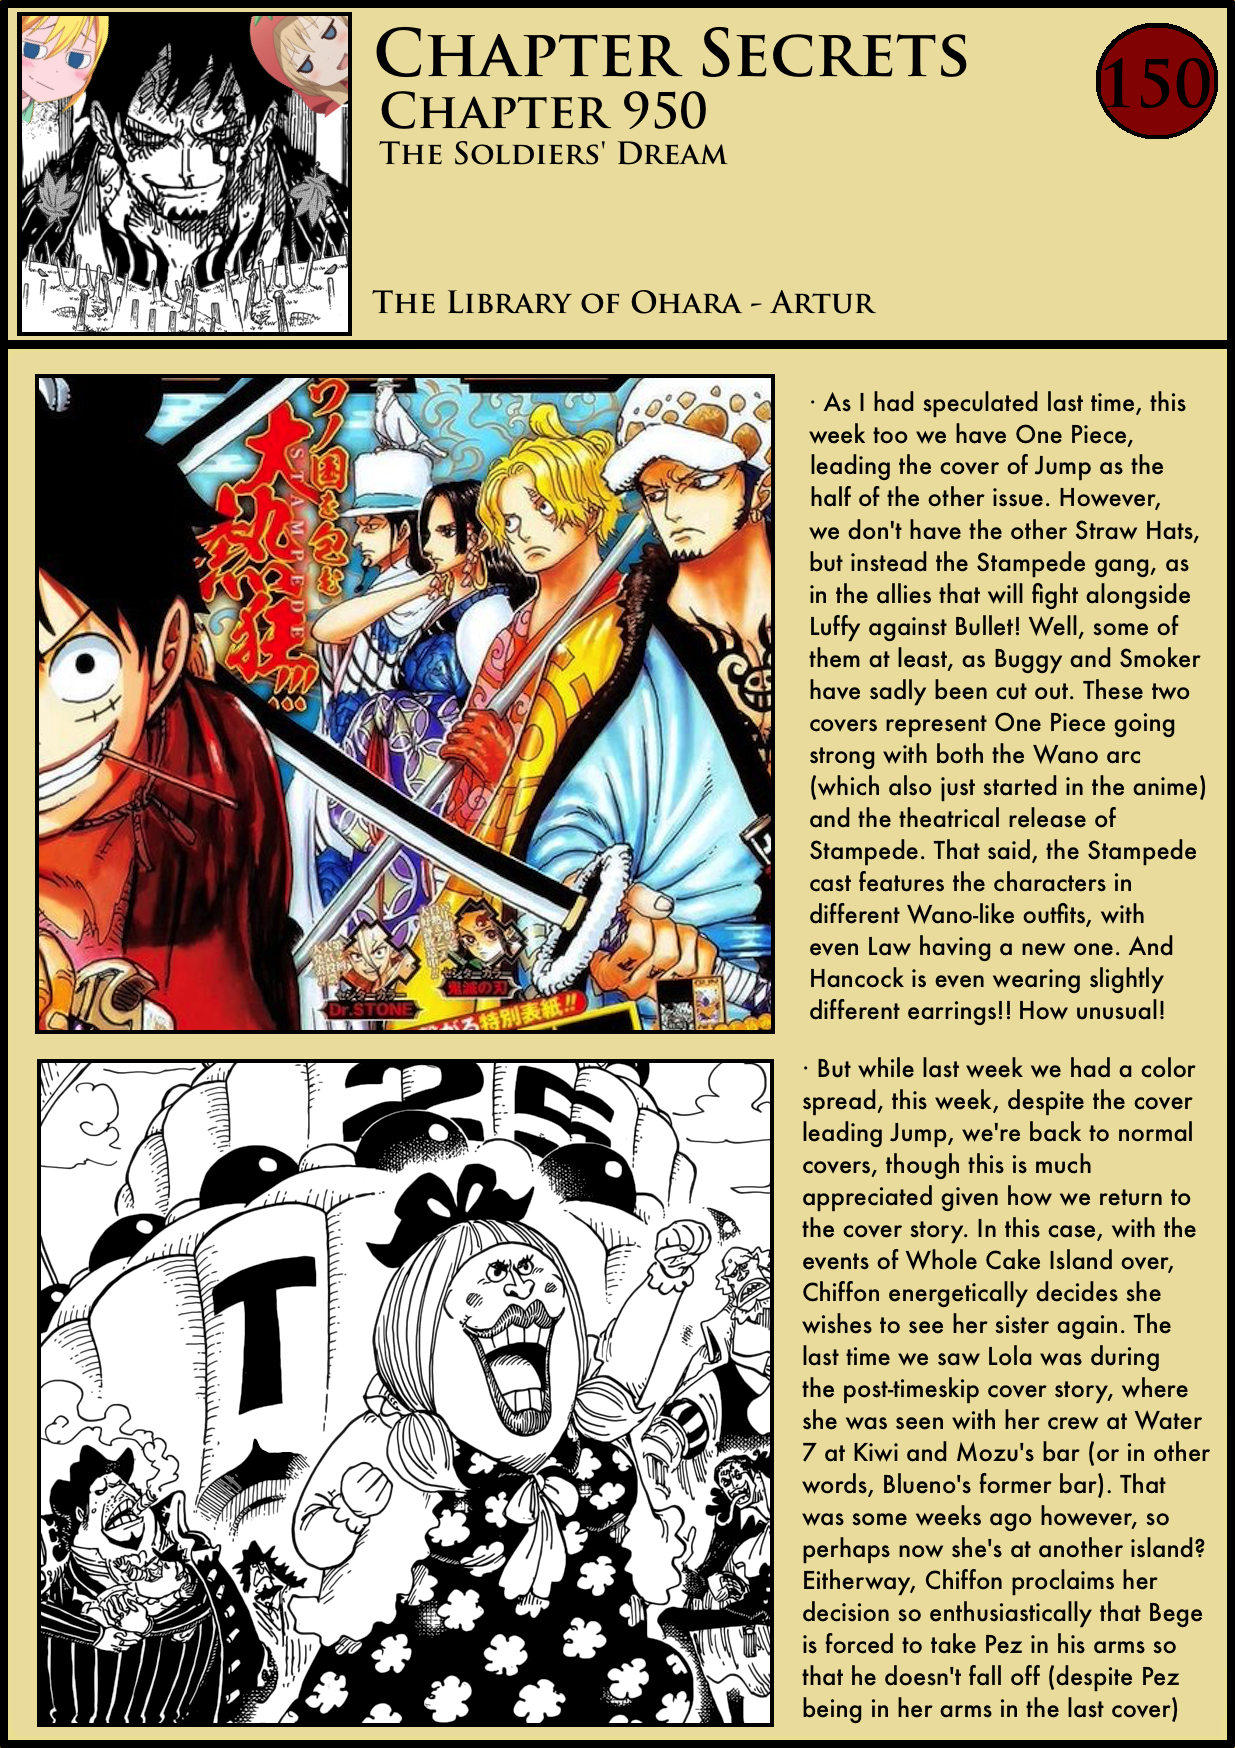 Artur - Library of Ohara on X: One Piece Live Action Cast by